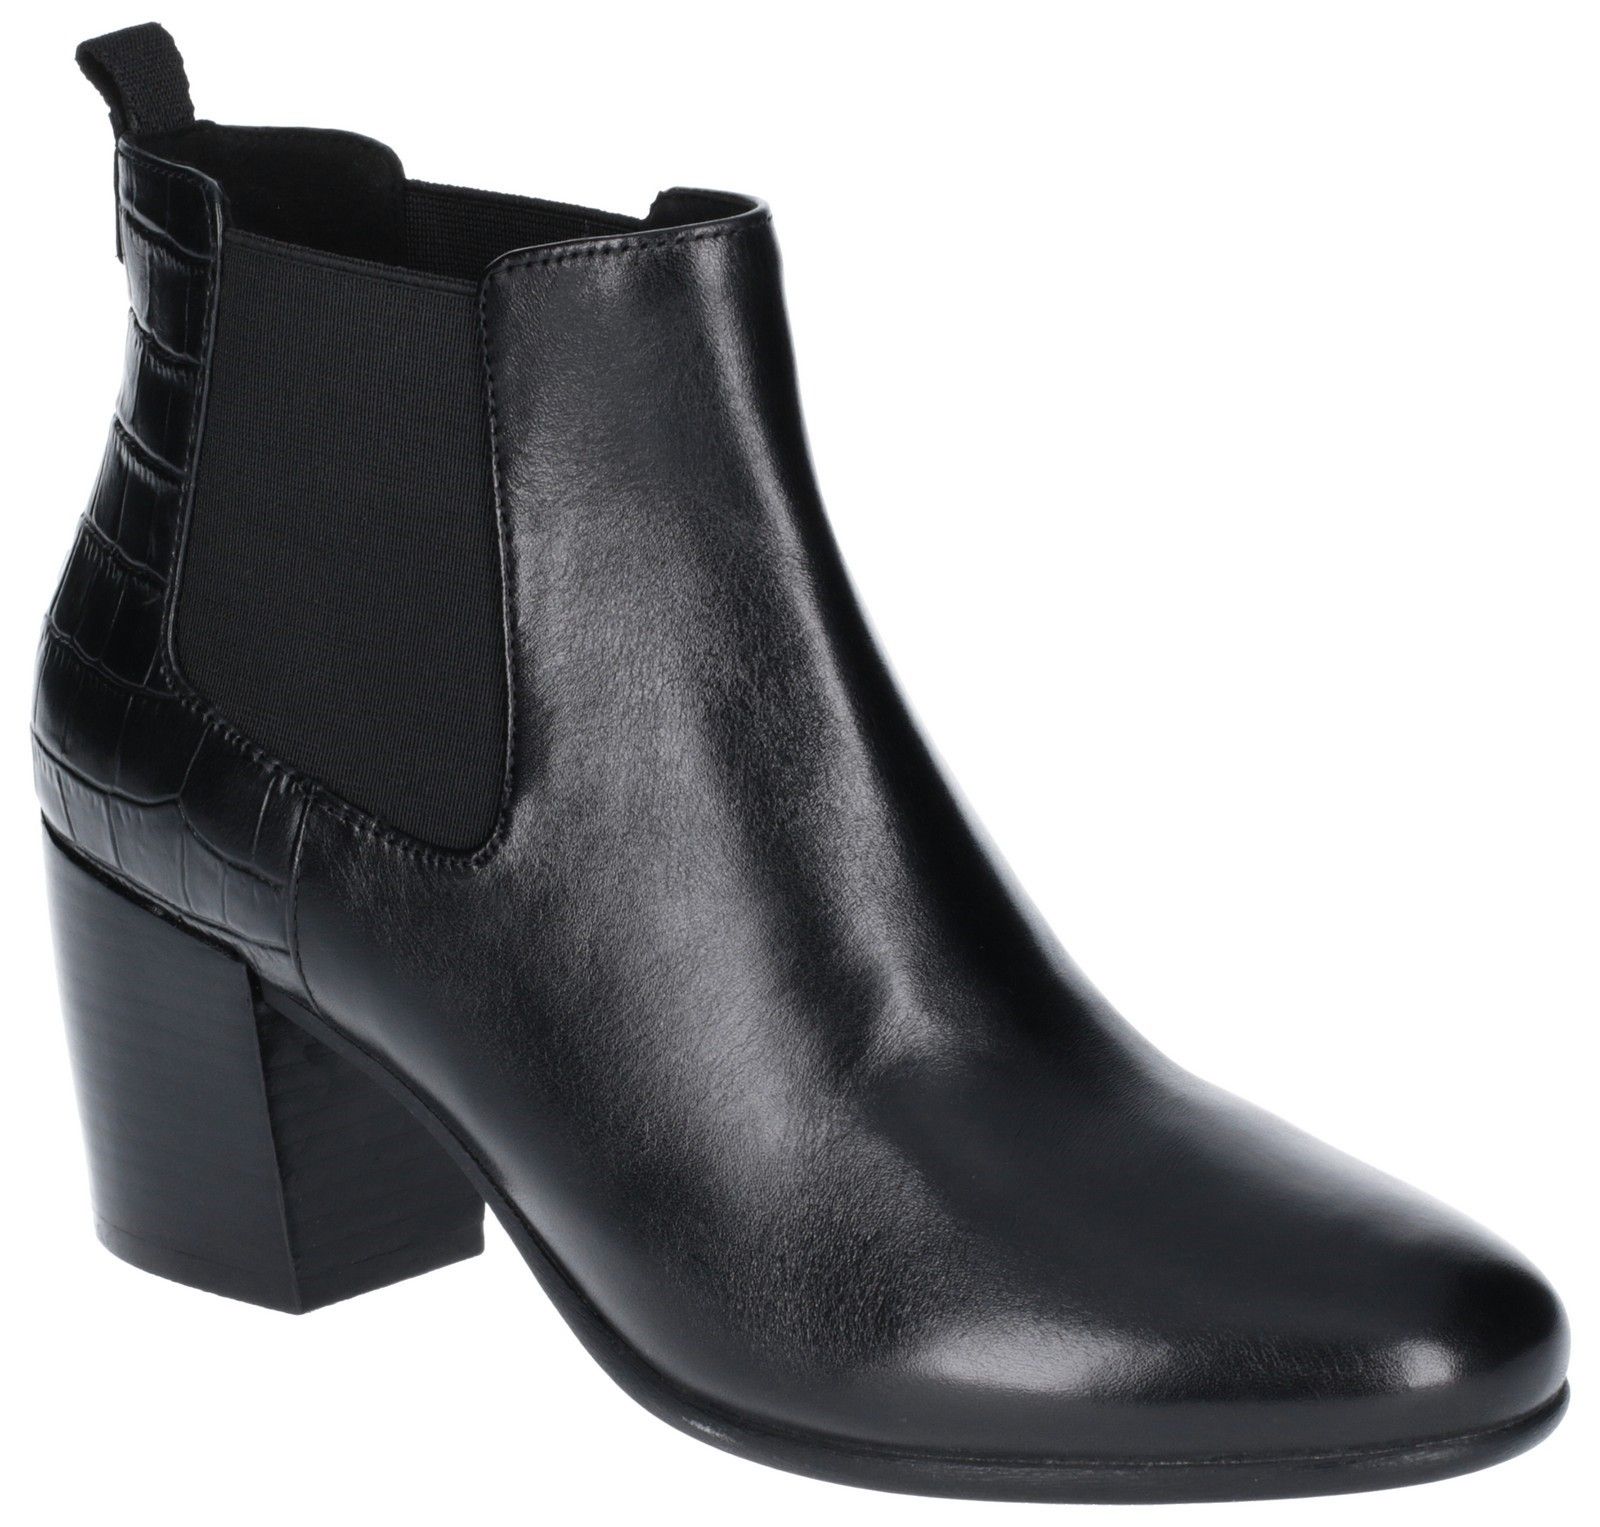 Practical And Comfortable, These Casual And Contemporary Ankle Boots Will Add A Dynamic Touch To Everyday Outfits. Ultra Breathable Geox Patented Perforated Sole With A Durable And Flexible Tread Providing Excellent Grip.Practical. 
Comfort Fit. 
Anti-Slip Outsole. 
Full Leather Upper.